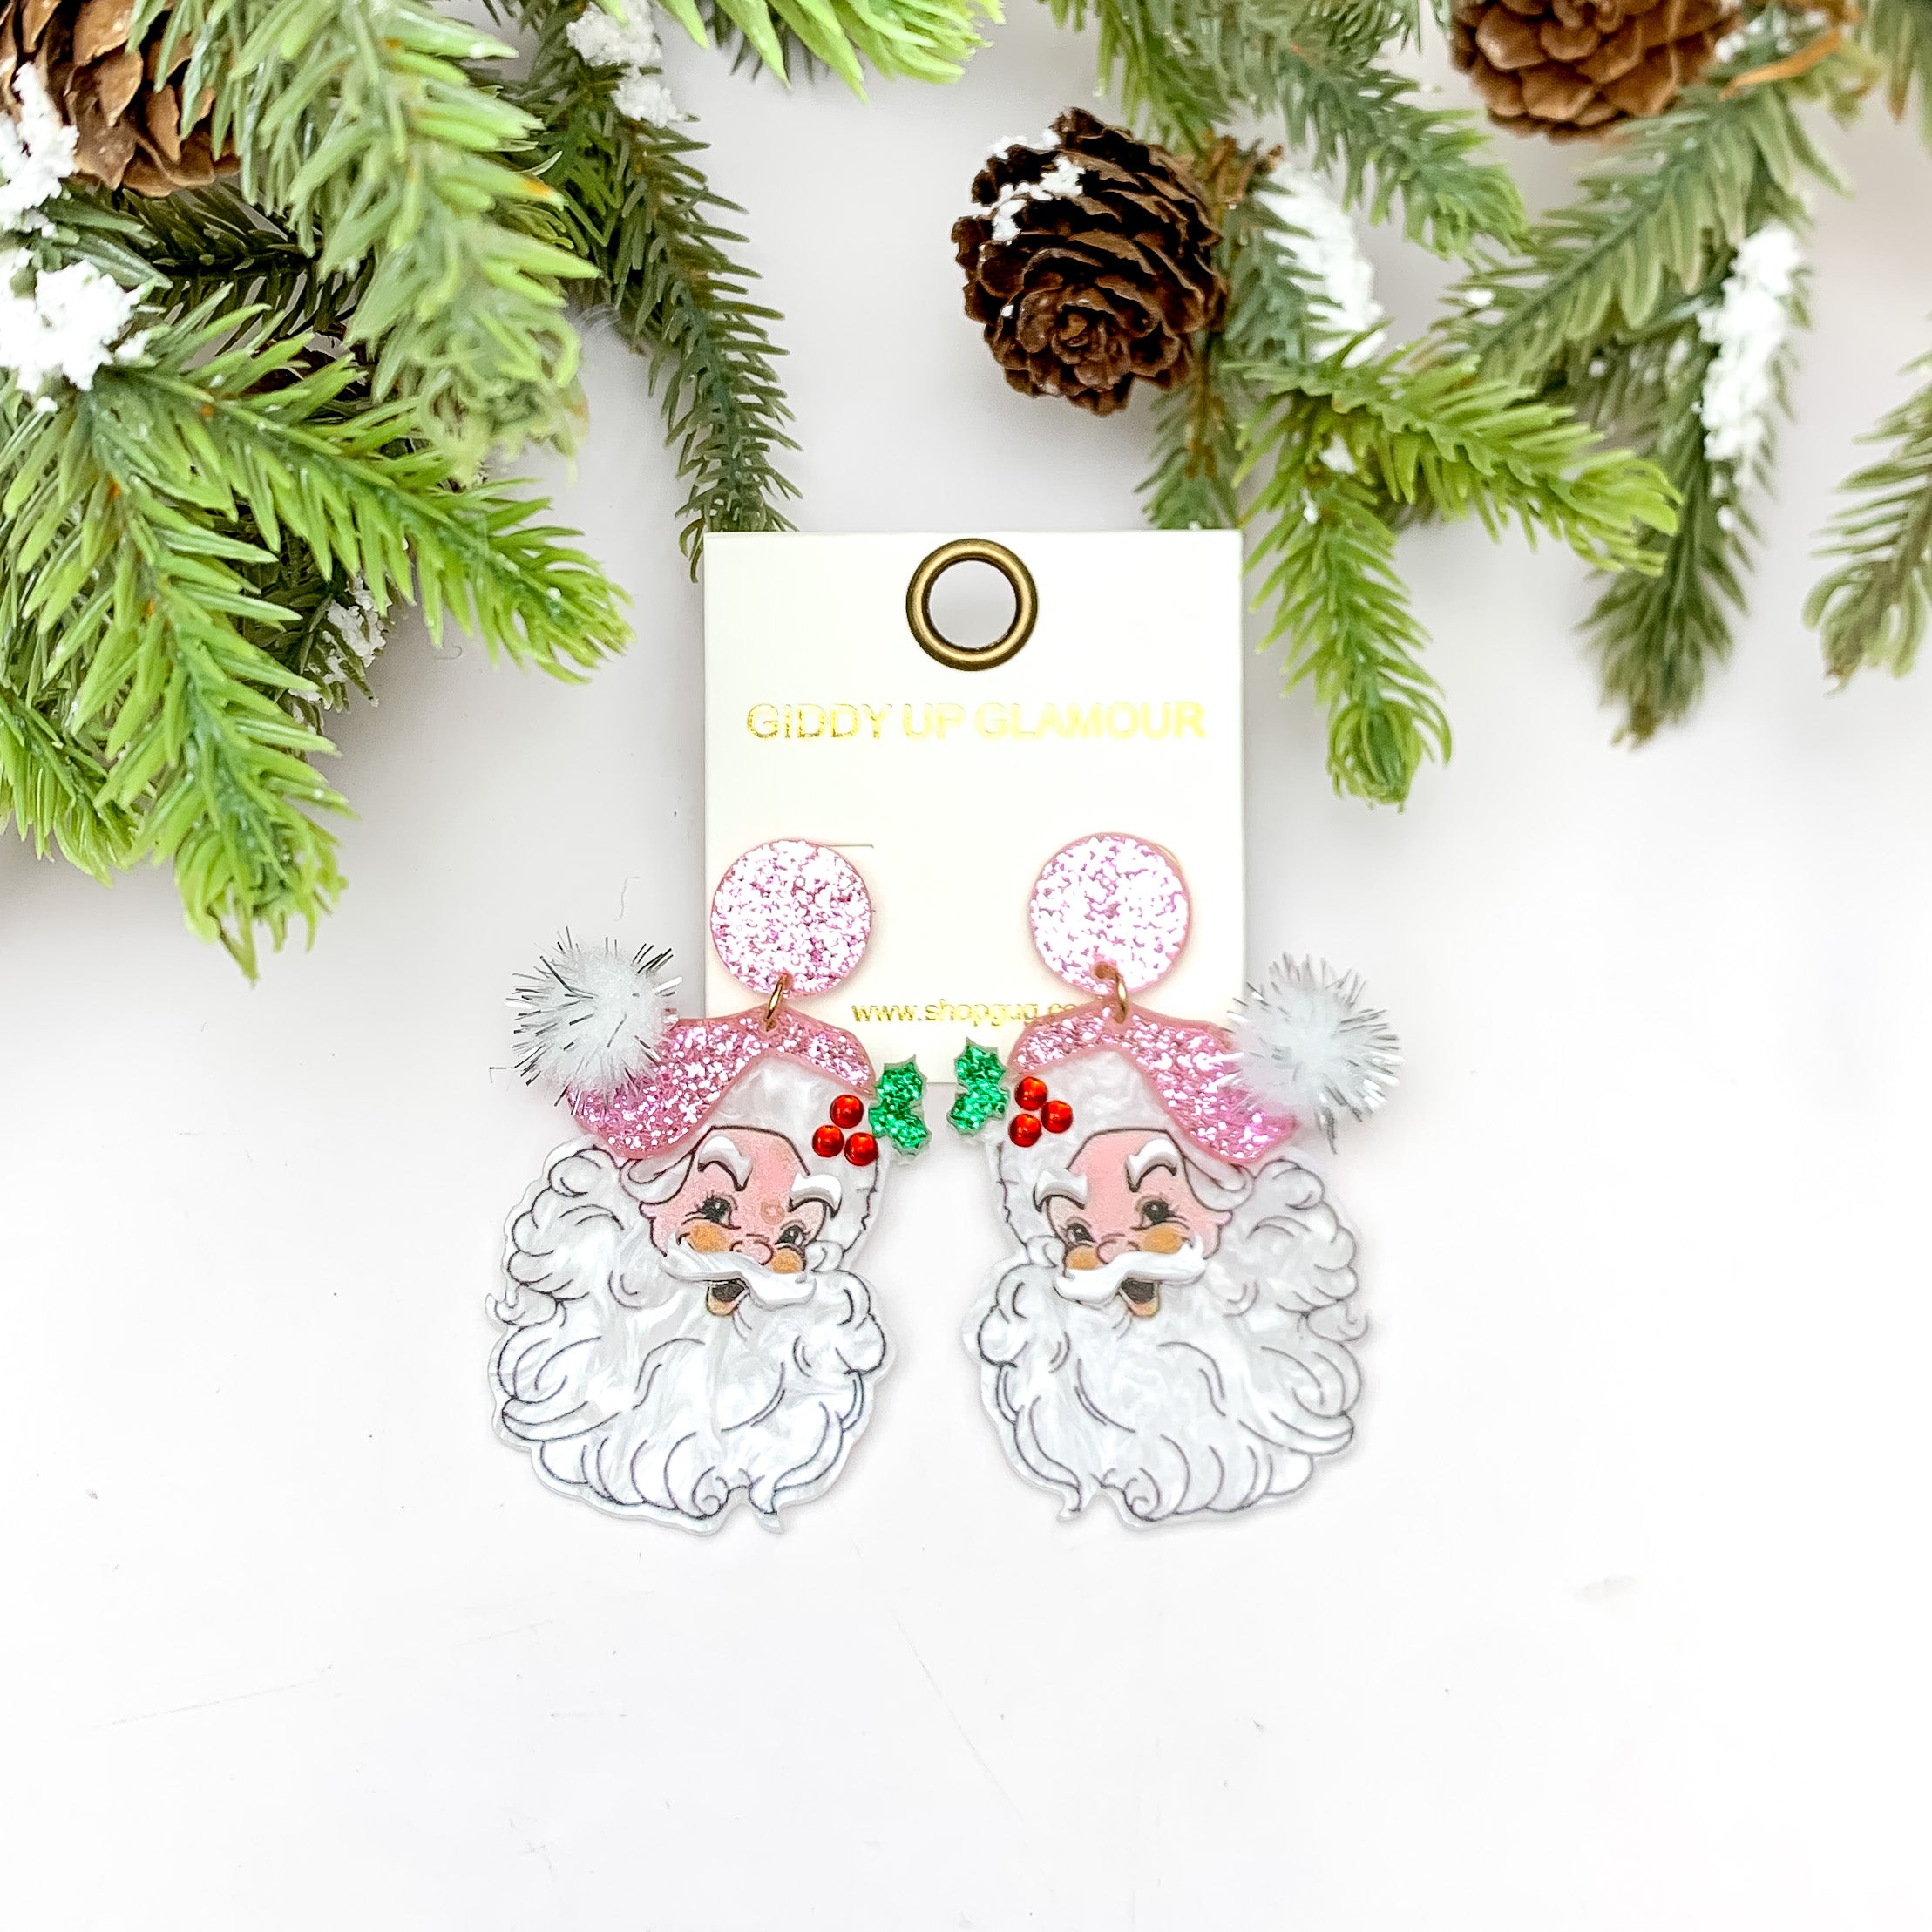 Glittery Pink Santa Earrings With Pom. These earrings are pictured on a white background with a tree and pine cones at the top.